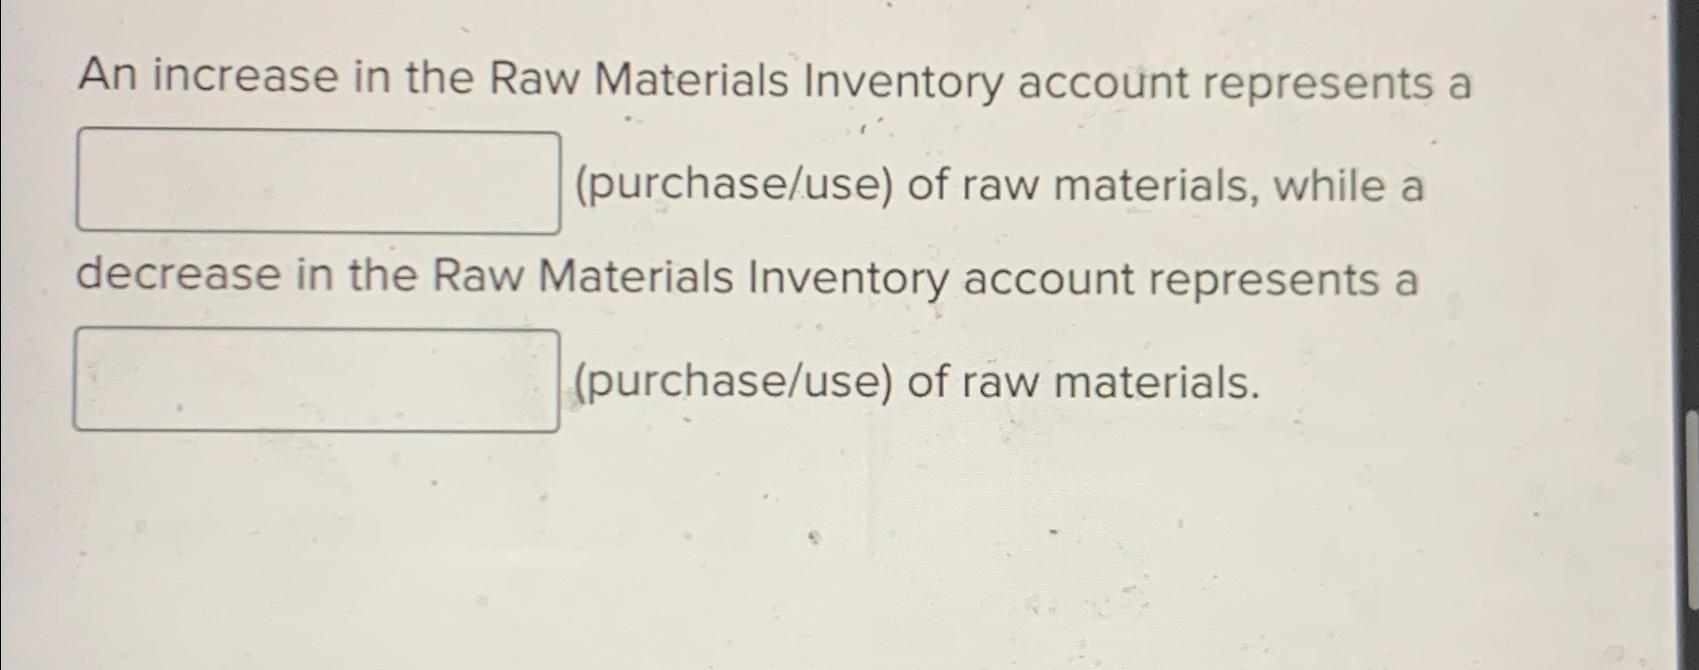 An increase in the Raw Materials Inventory account represents a (purchase/use) of raw materials, while a